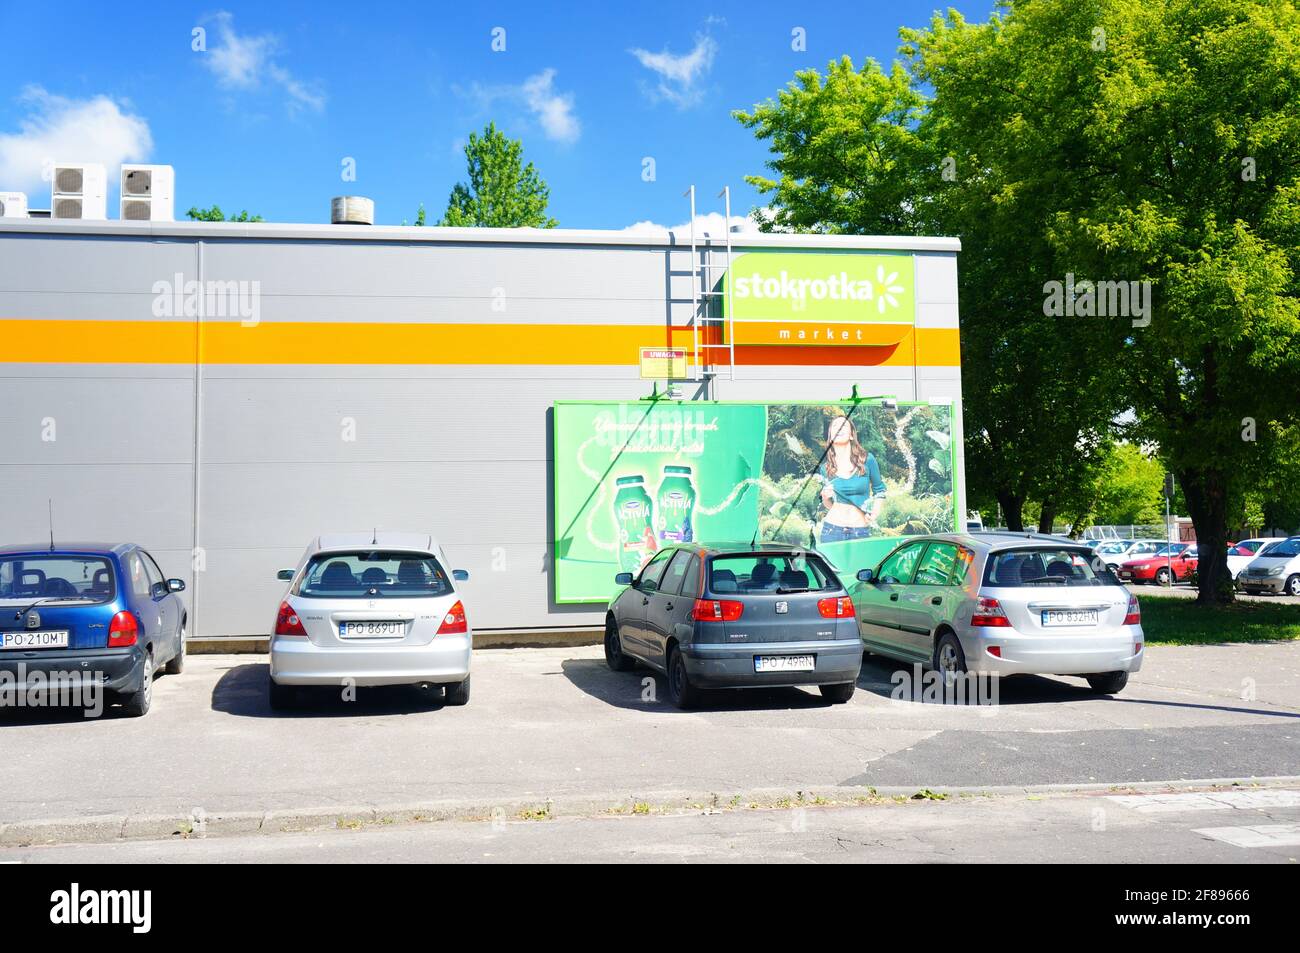 POZNAN, POLAND - May 25, 2014: Parked cars in front of an Stokrotka supermarket Stock Photo